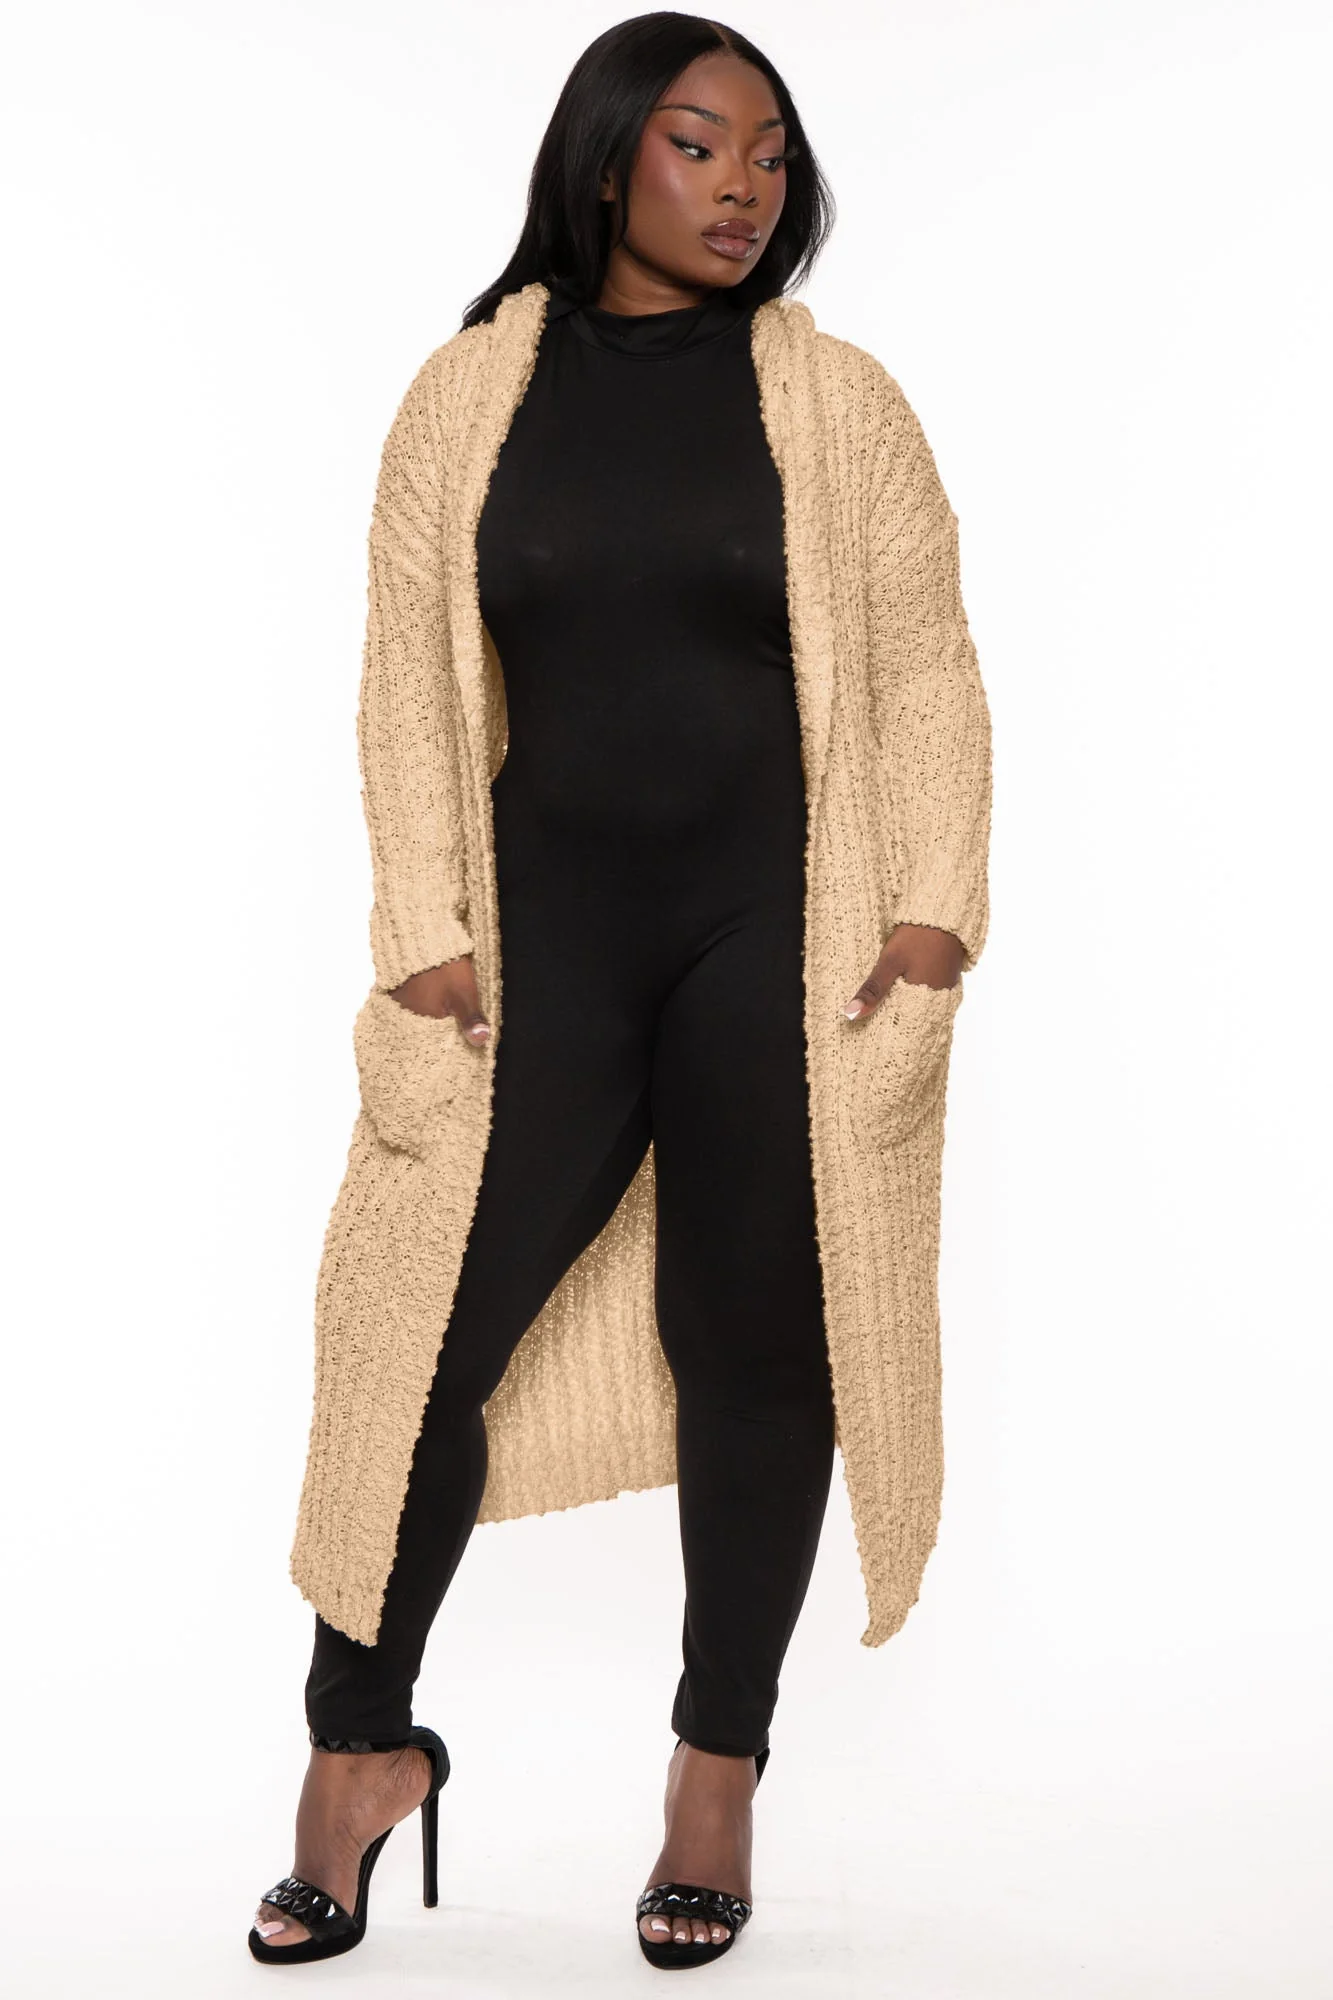 PLUS SIZE COZY HOODIE POPCORN DUSTER CARDIGAN -TAUPE